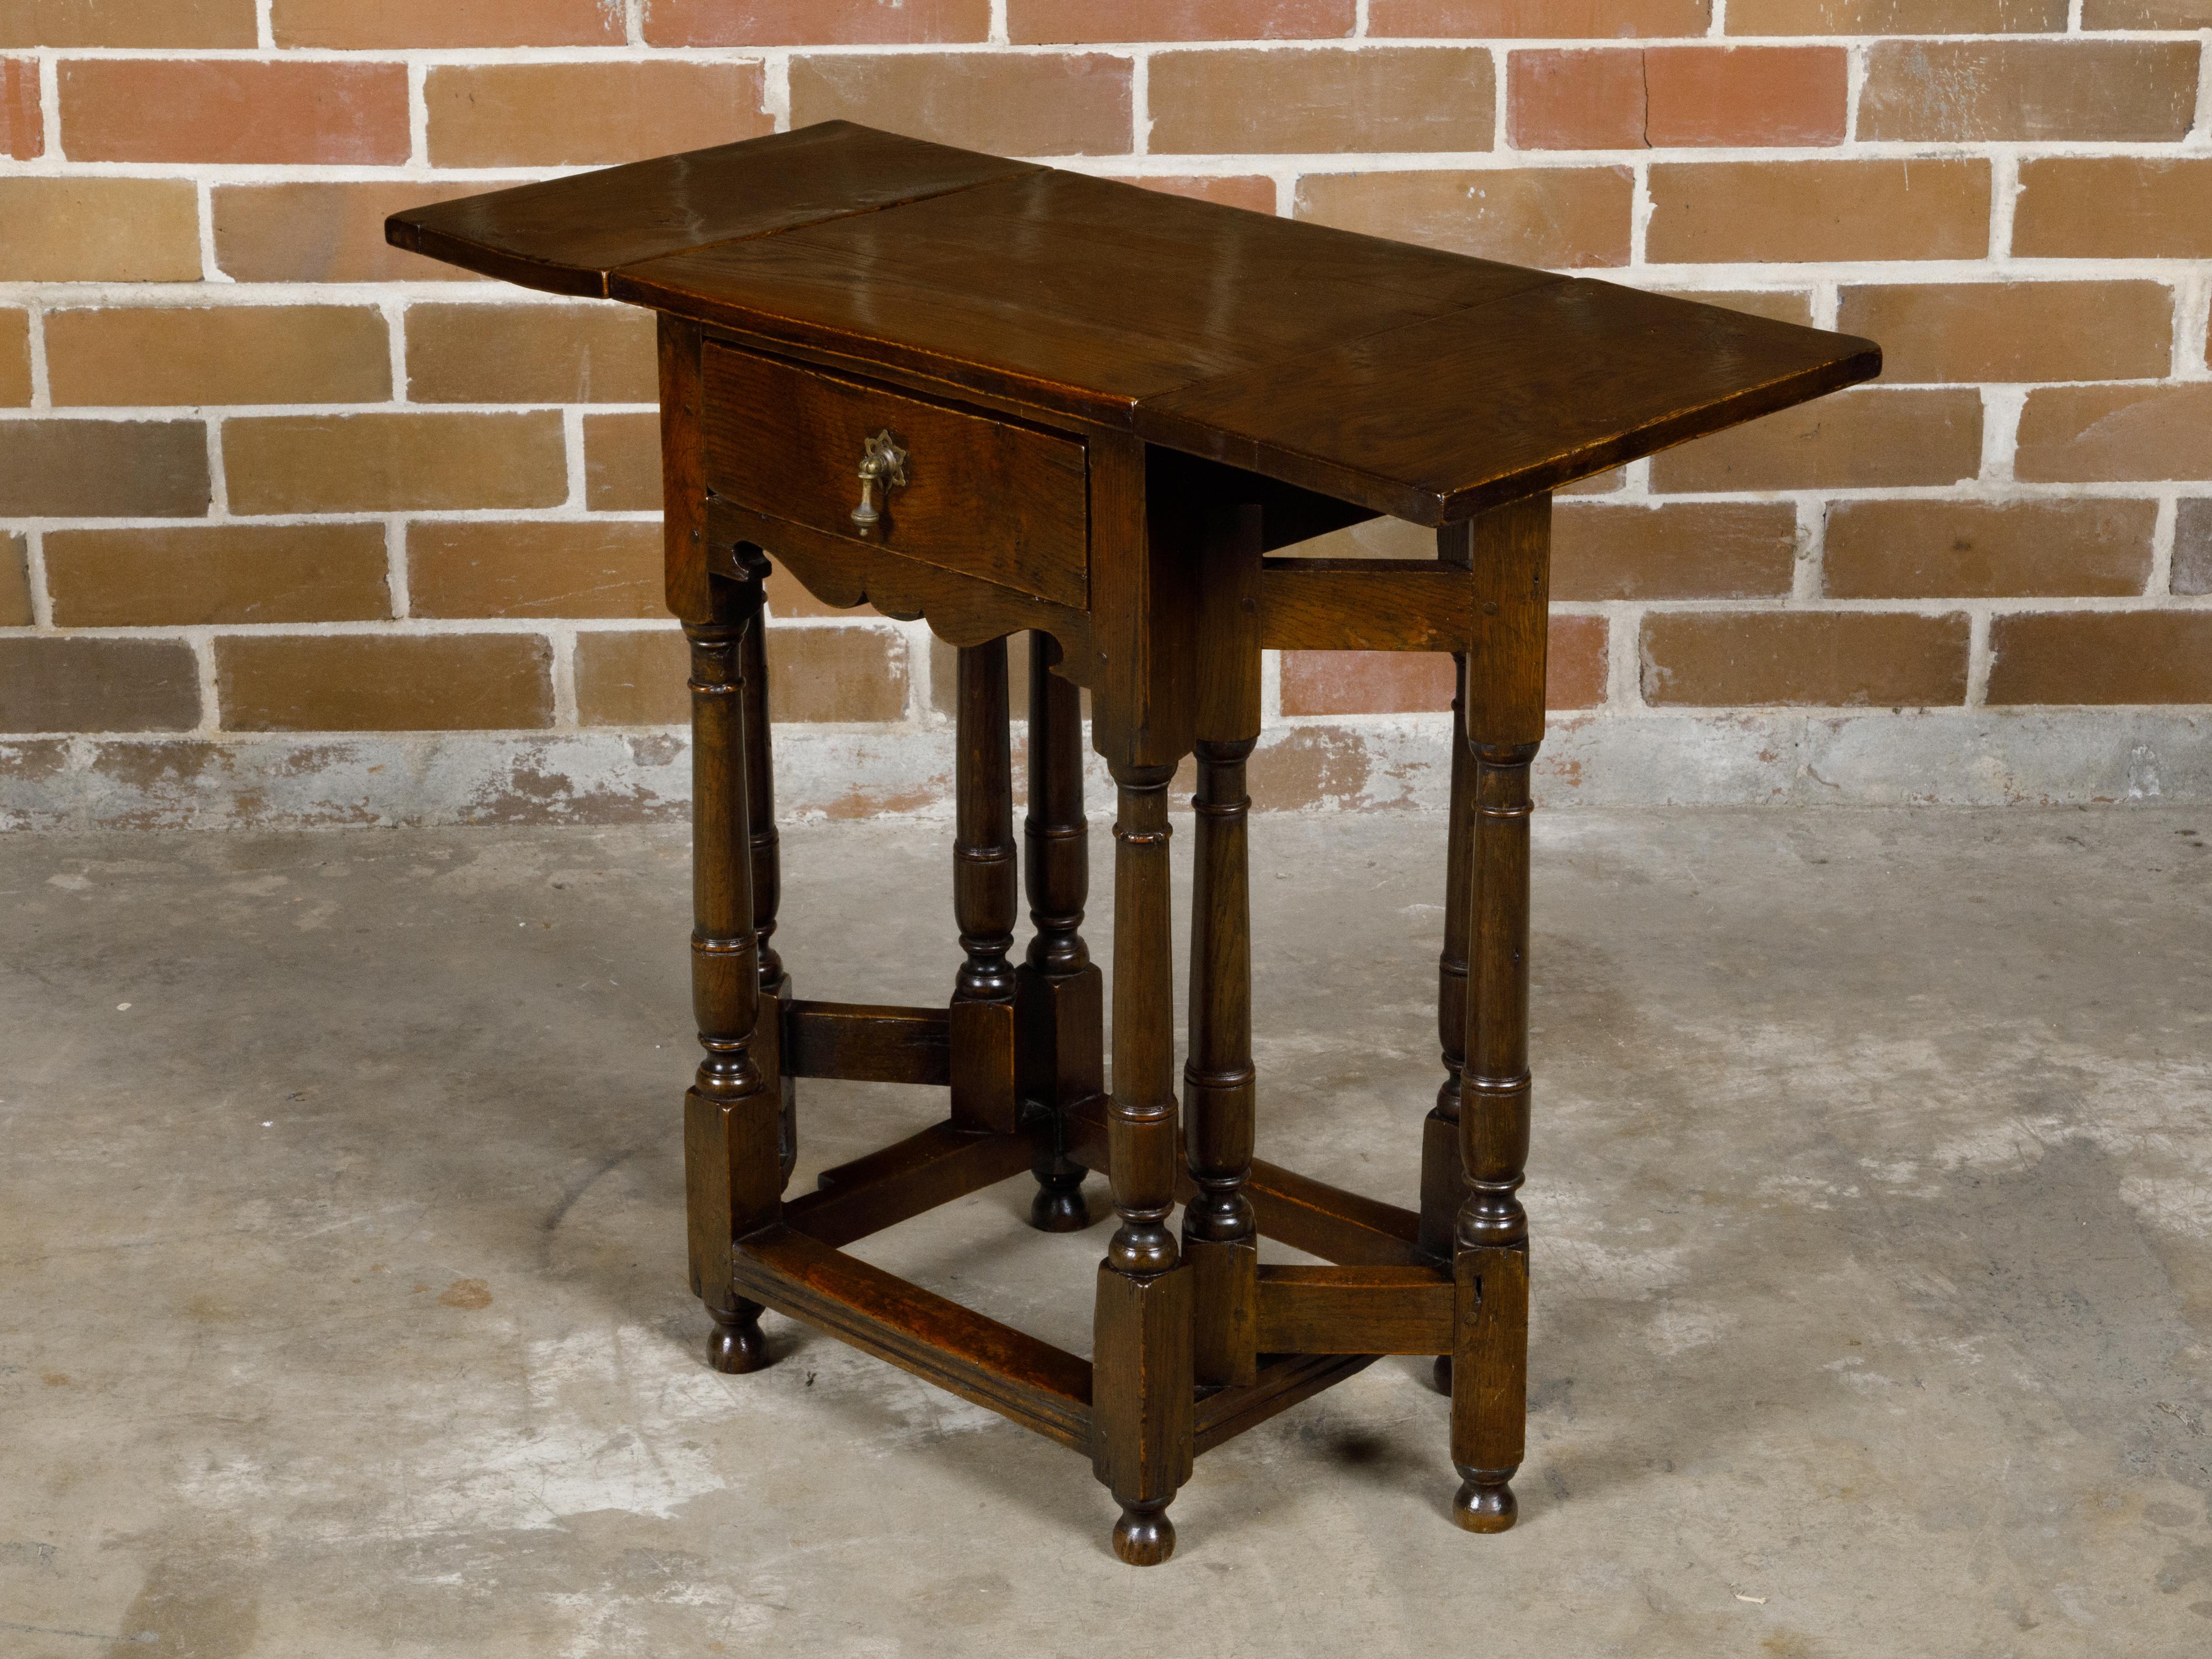 English 19th Century Oak Drop Leaf Table with Swivel Legs and Single Drawer For Sale 11